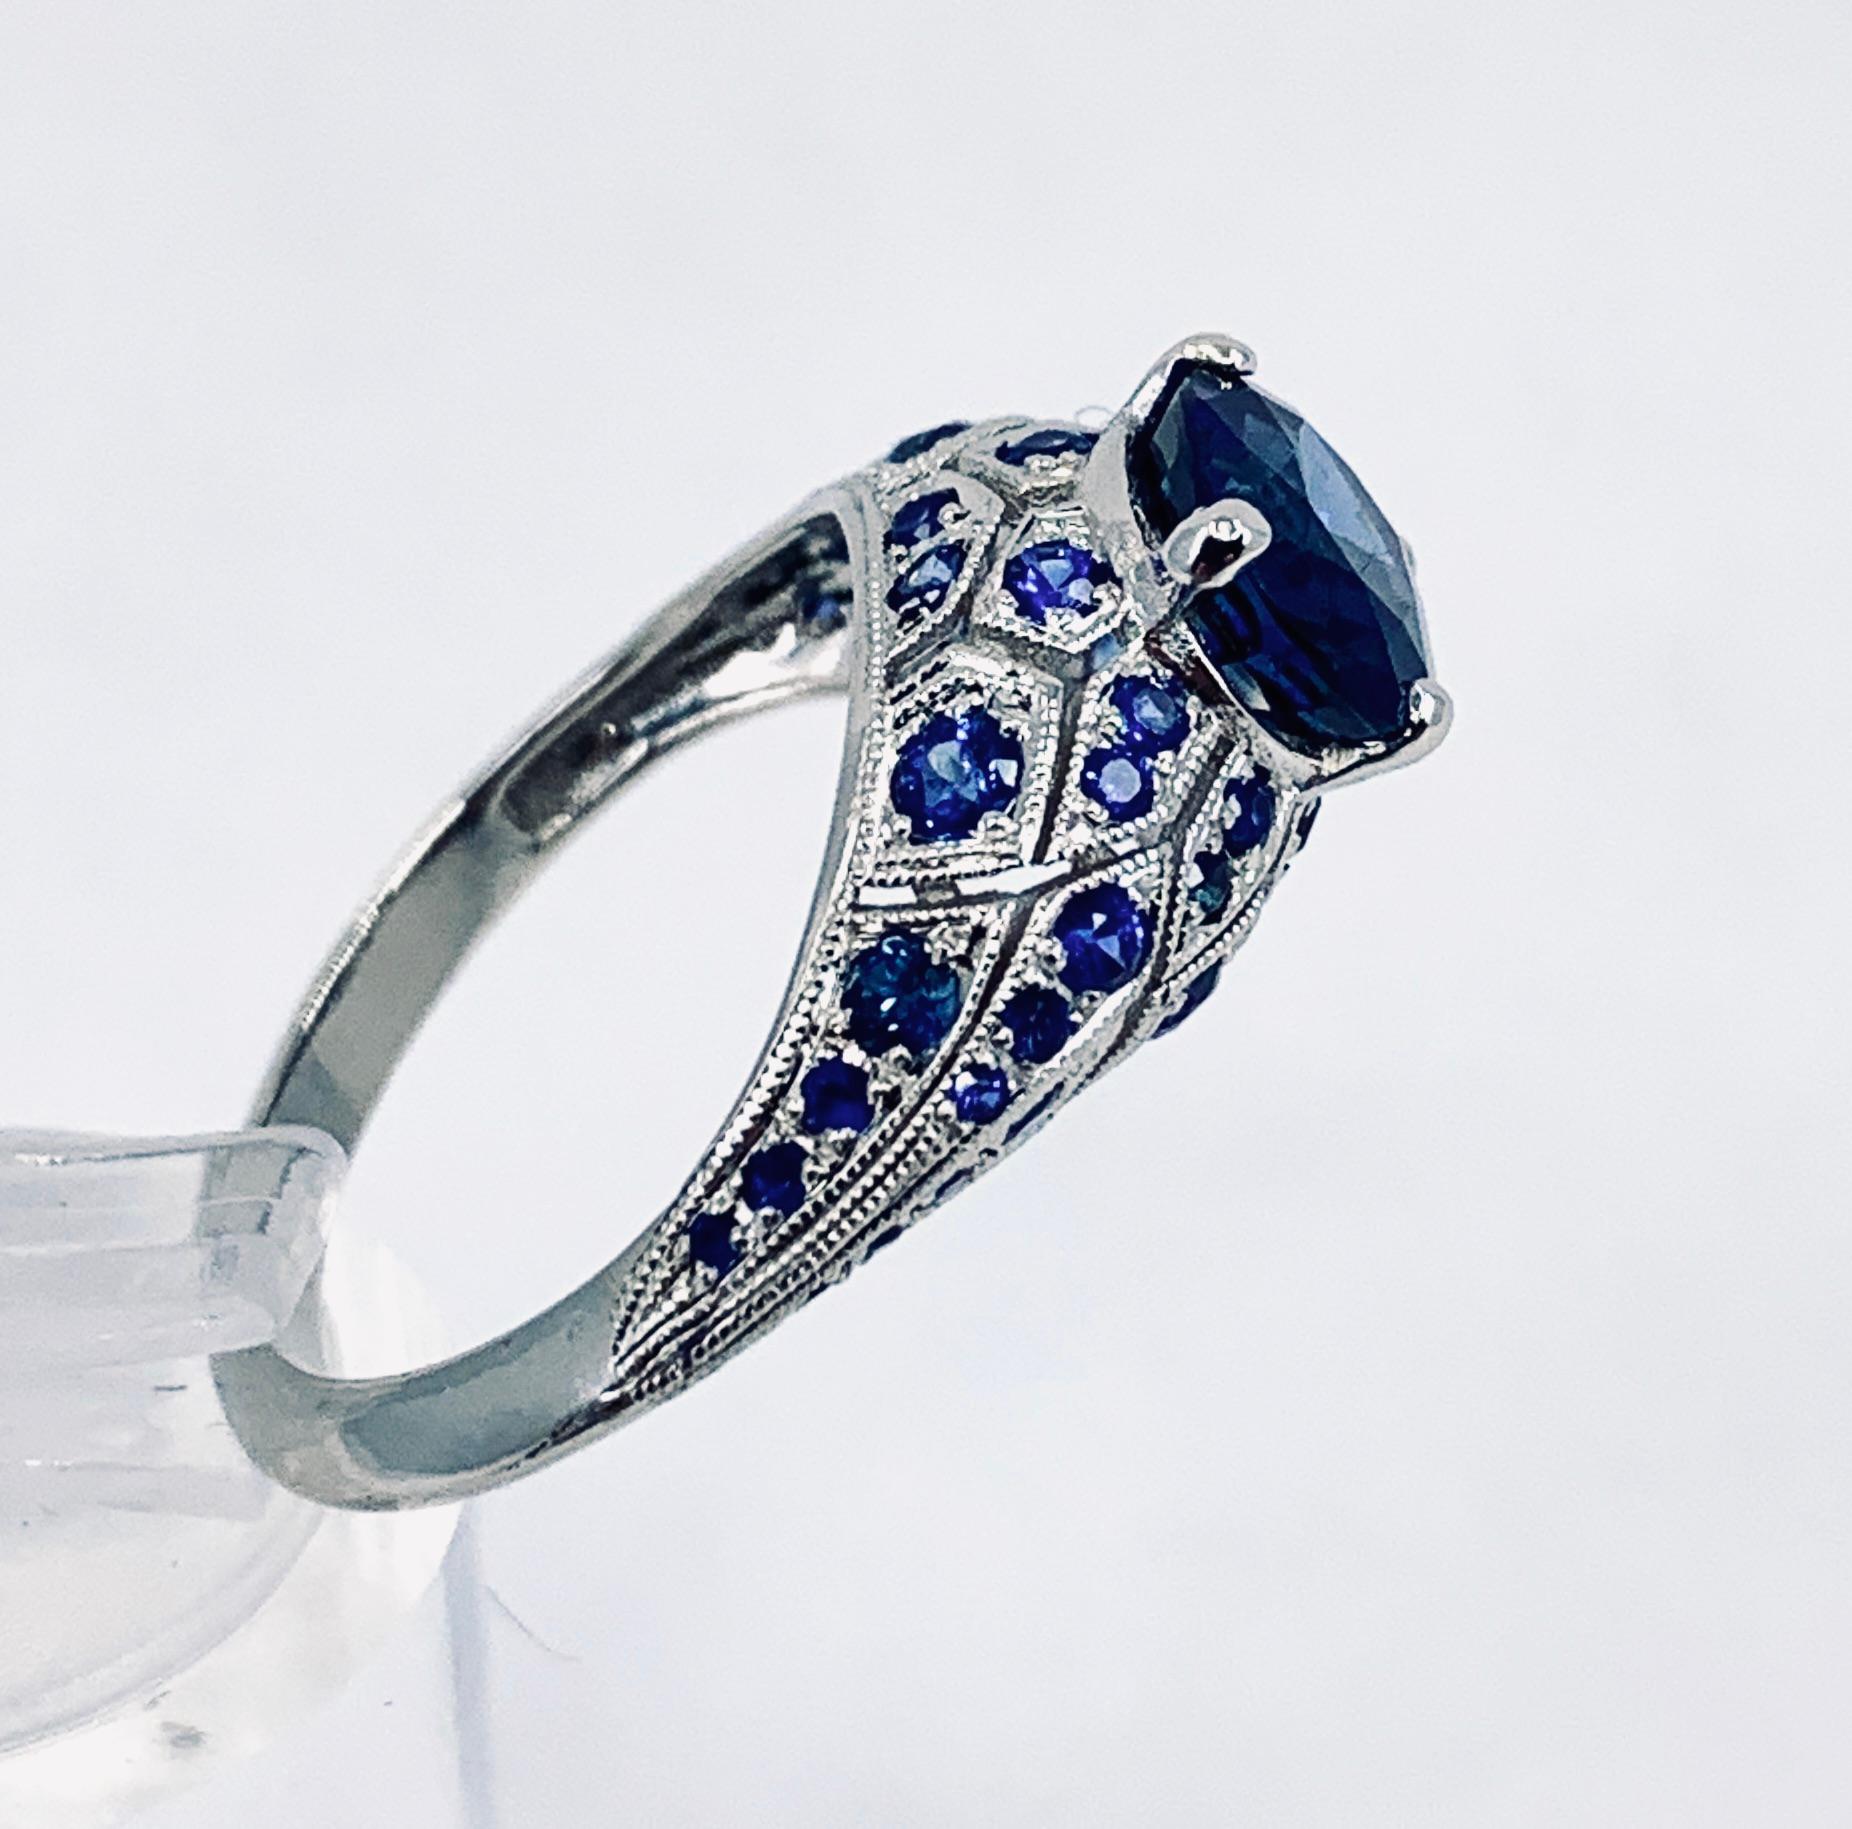 GIA-Certified 1.99 Carat Oval Sapphire in Platinum Edwardian-Style Bombe Setting For Sale 1